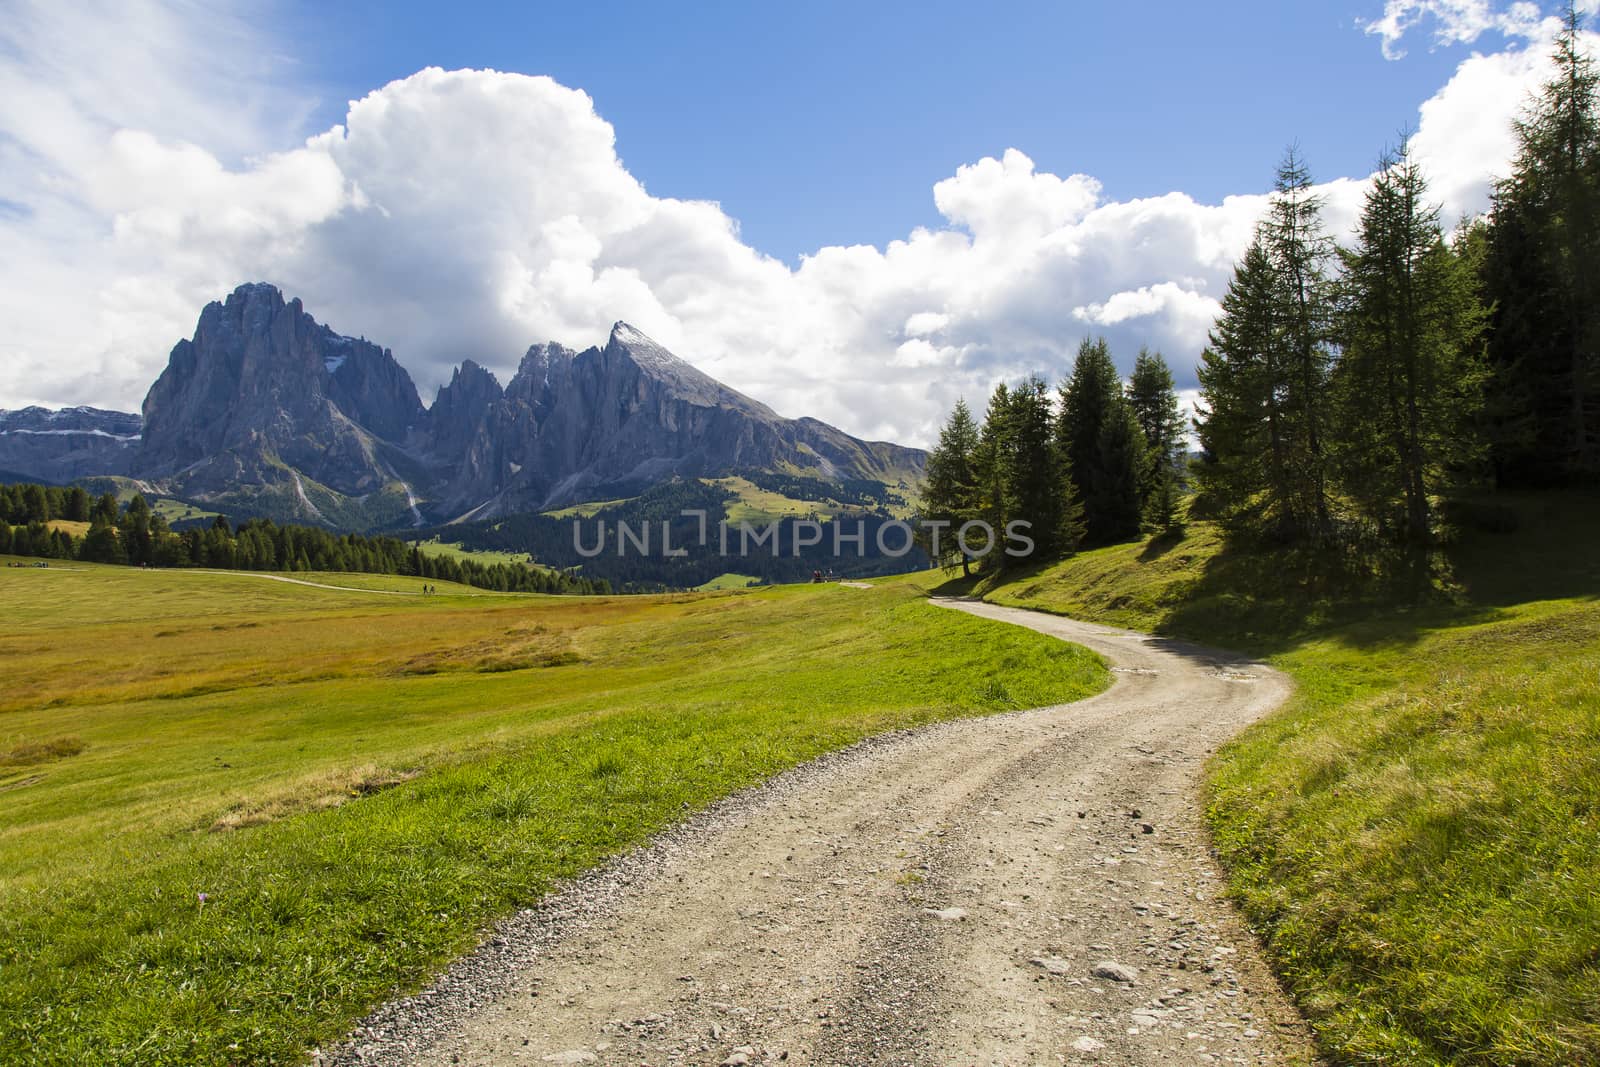 View a path with mountain range in the background